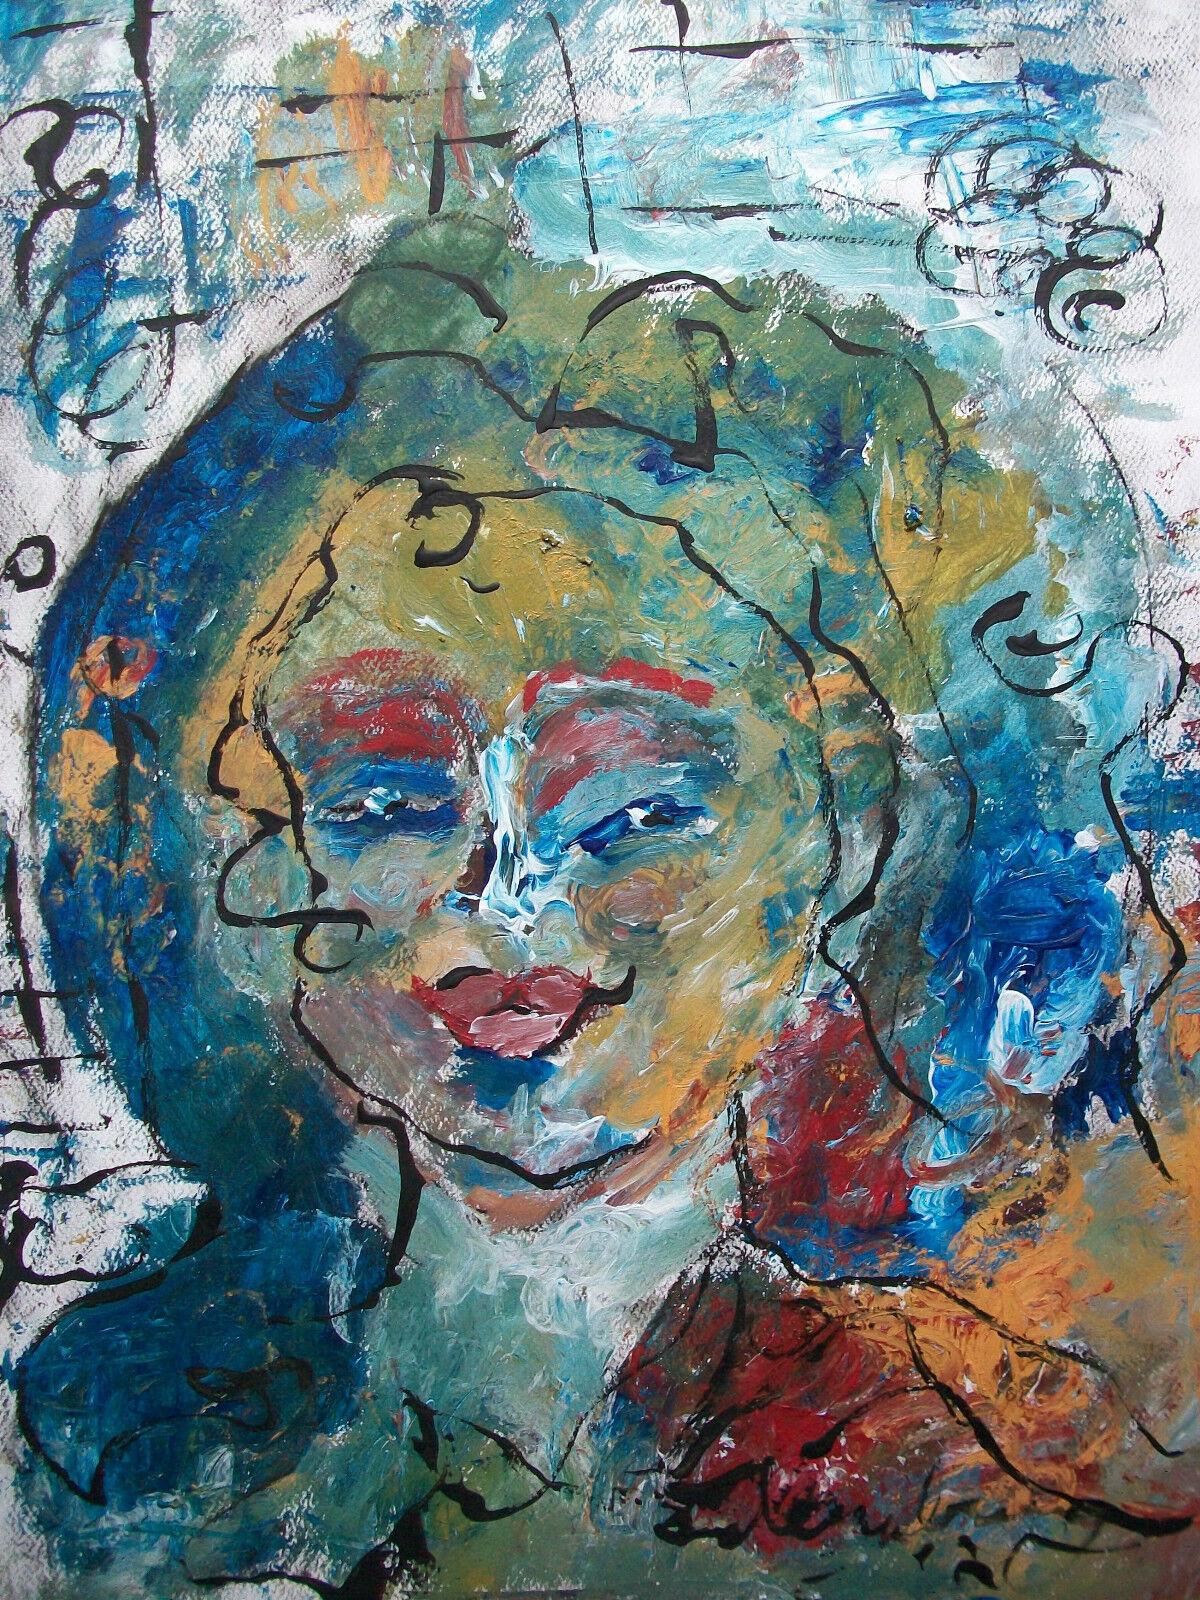 Sheila Denaburg, Contemporary Mixed Media Painting, Signed, Canada, C. 2011 For Sale 1